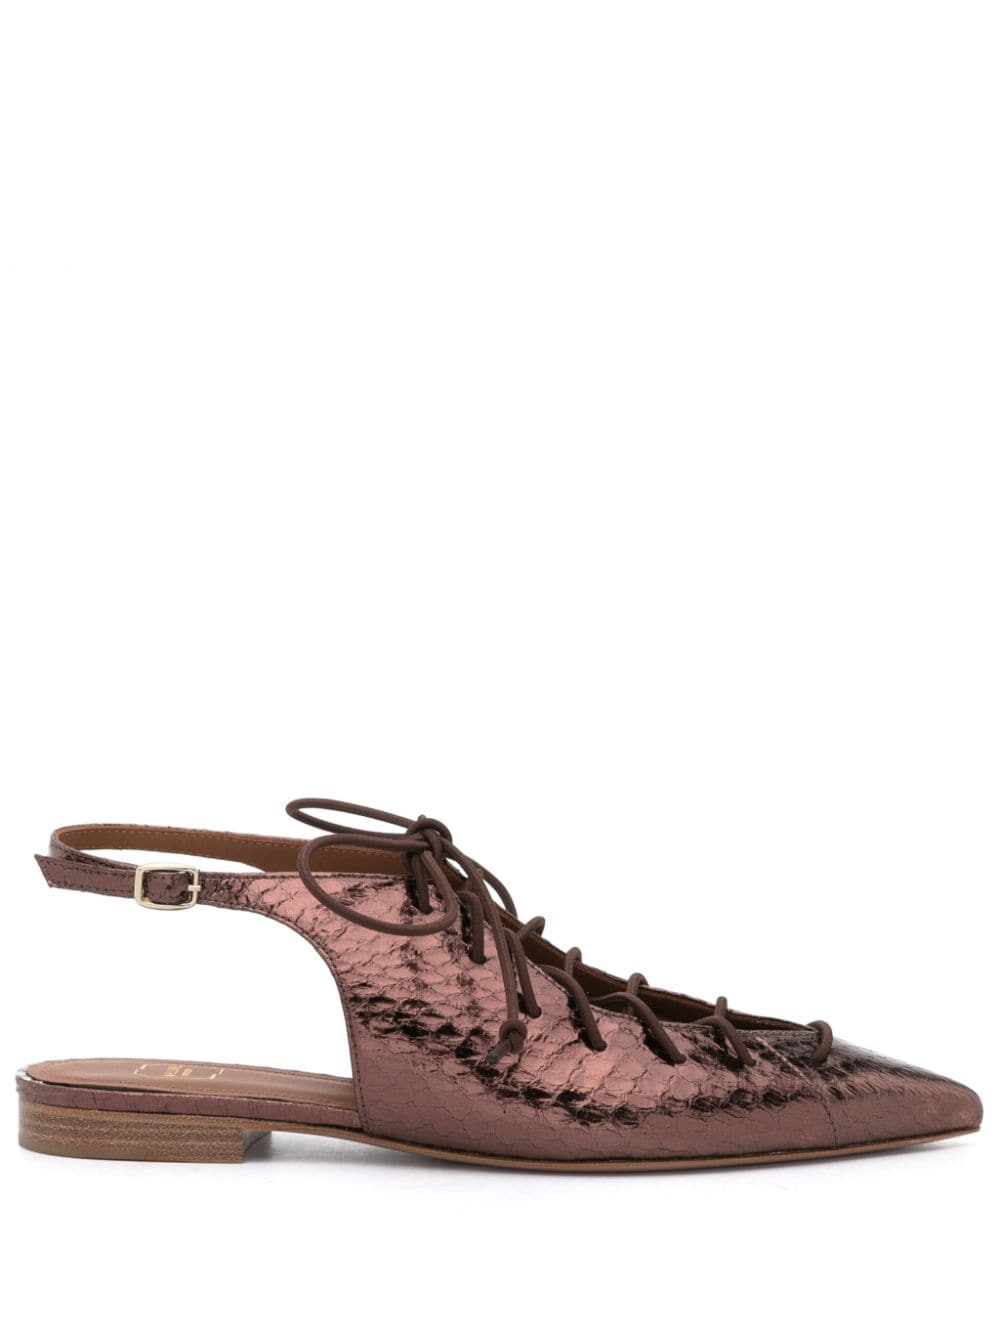 Malone Souliers Alessandra lace-up metallic slingbacks - Brown von Malone Souliers